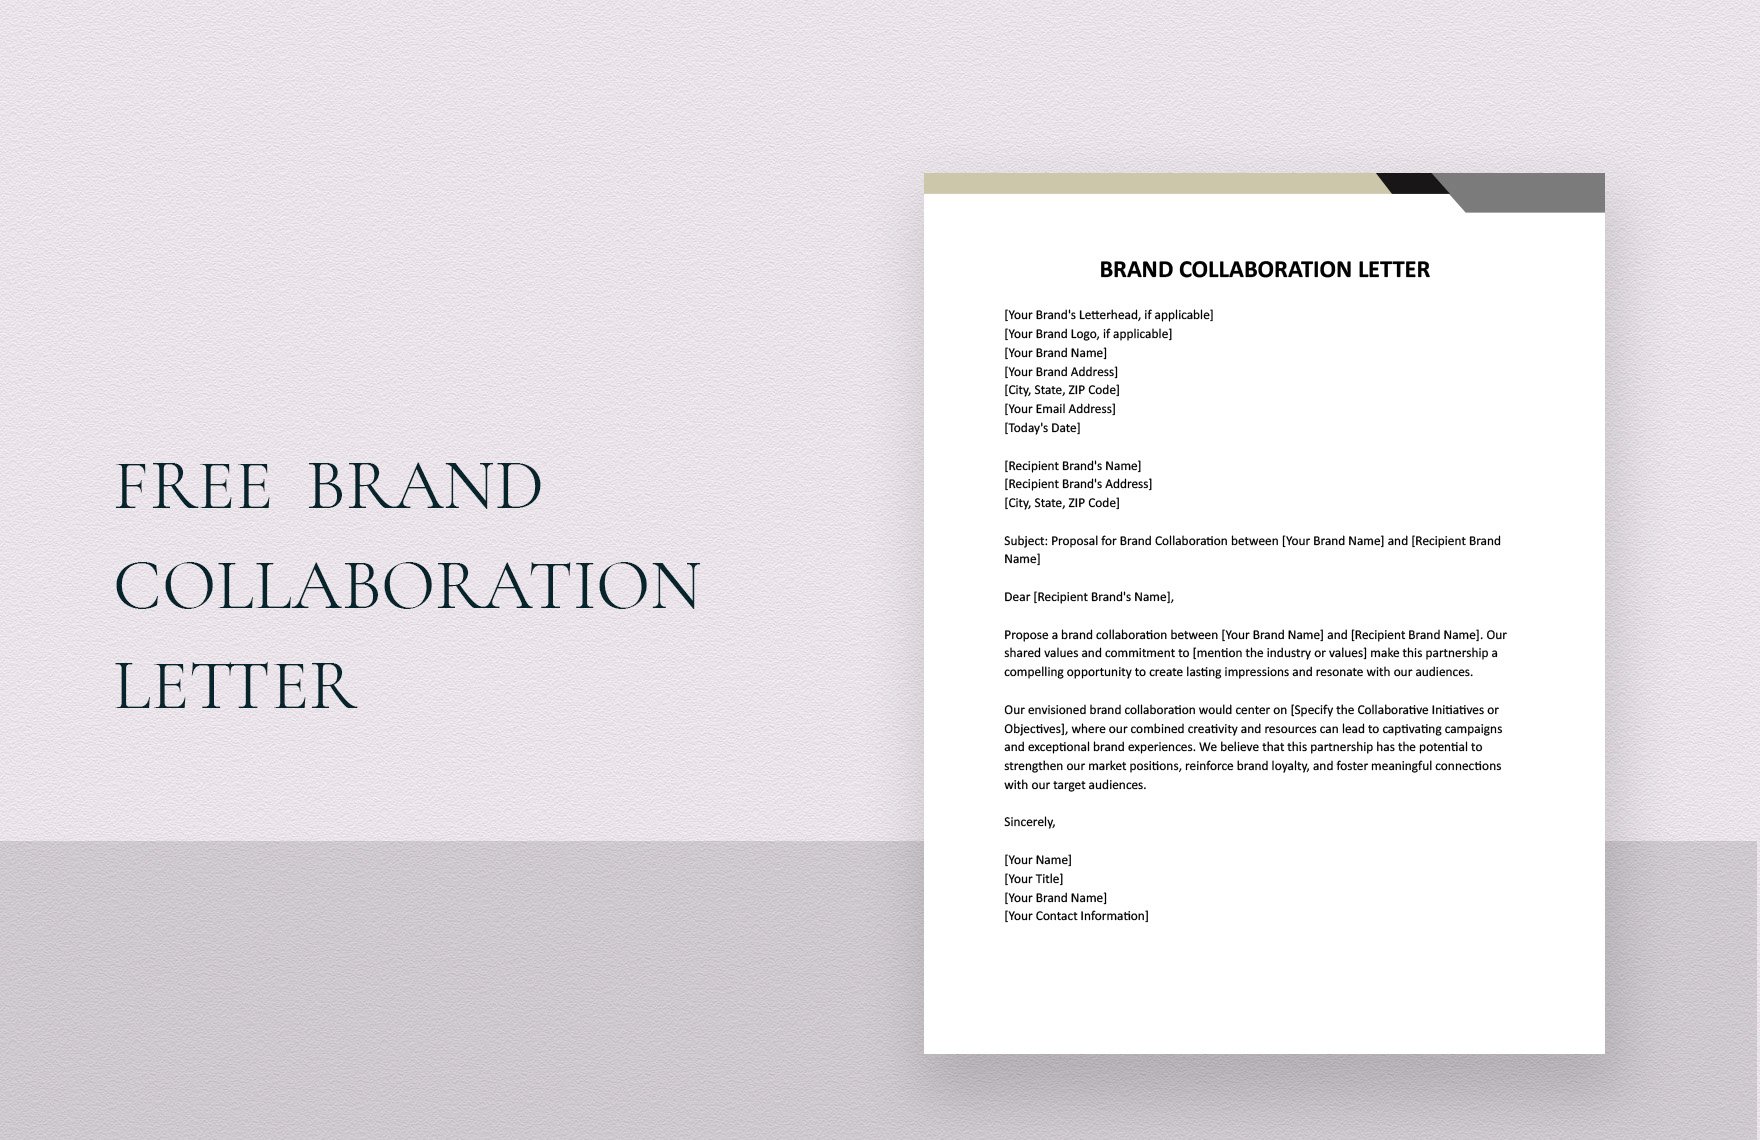 Brand Collaboration Letter in Word, Google Docs